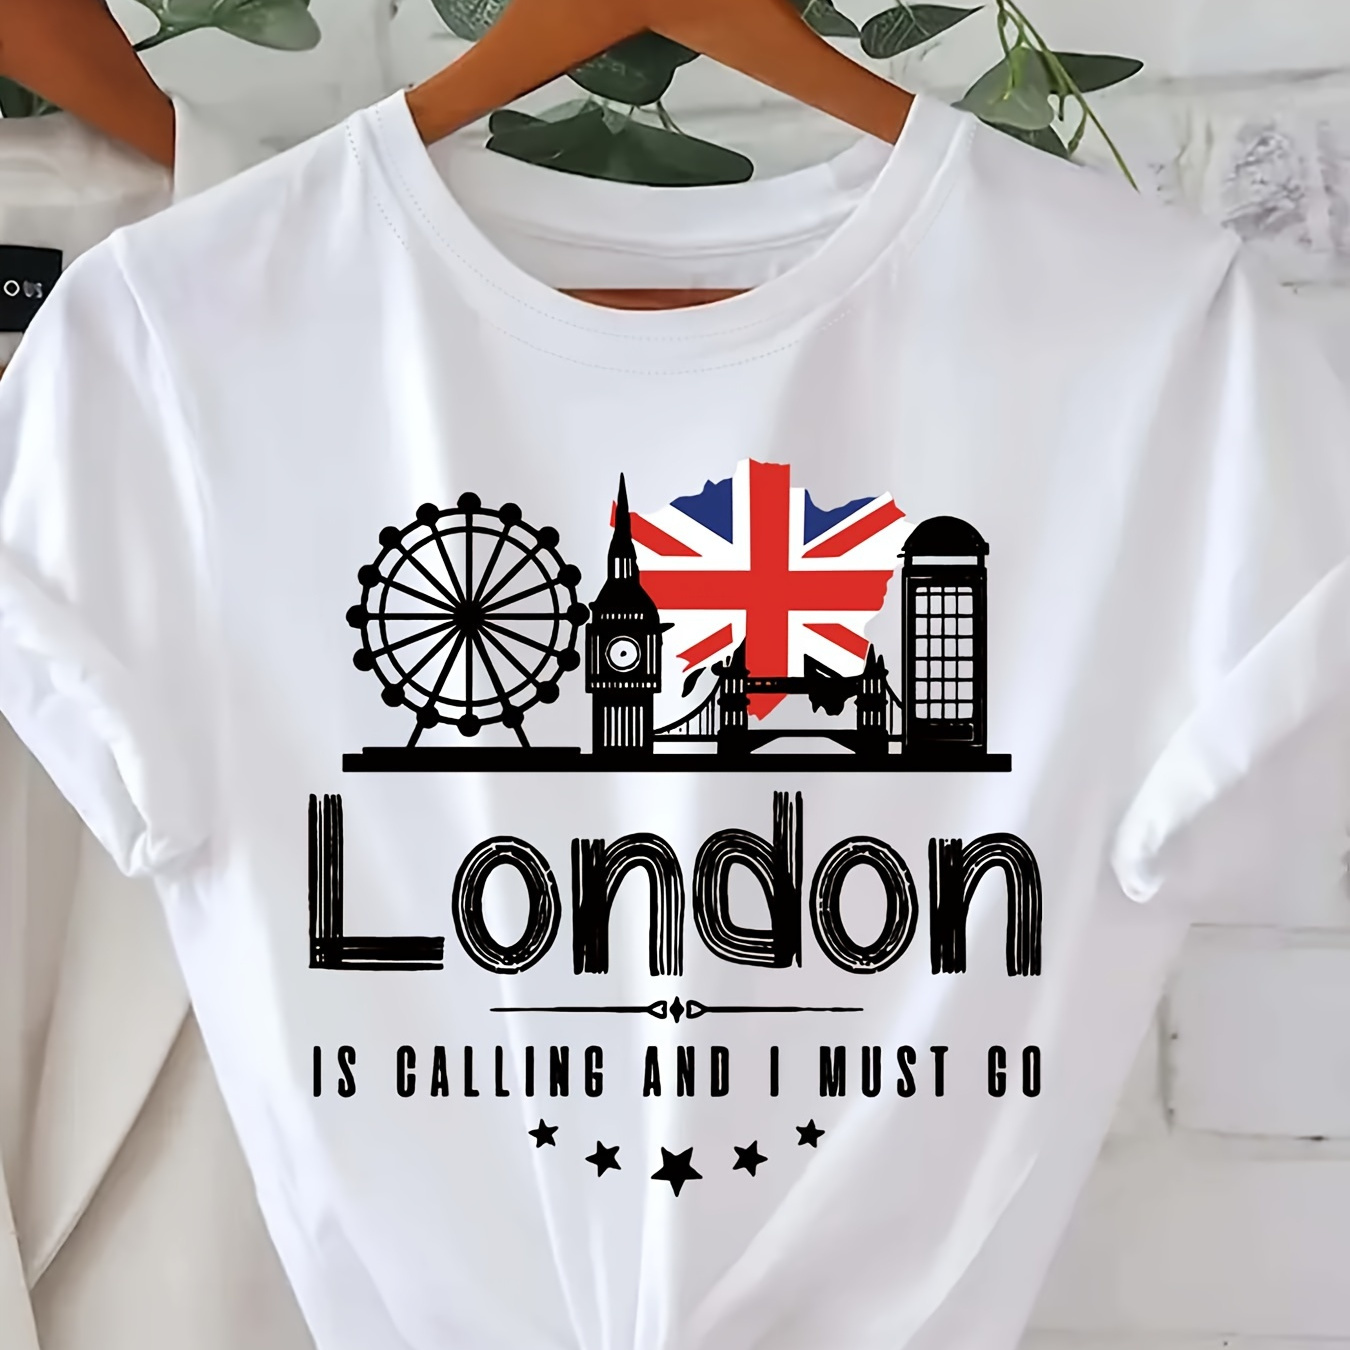 

London Letter Print T-shirt, Short Sleeve Crew Neck Casual Top For Summer & Spring, Women's Clothing